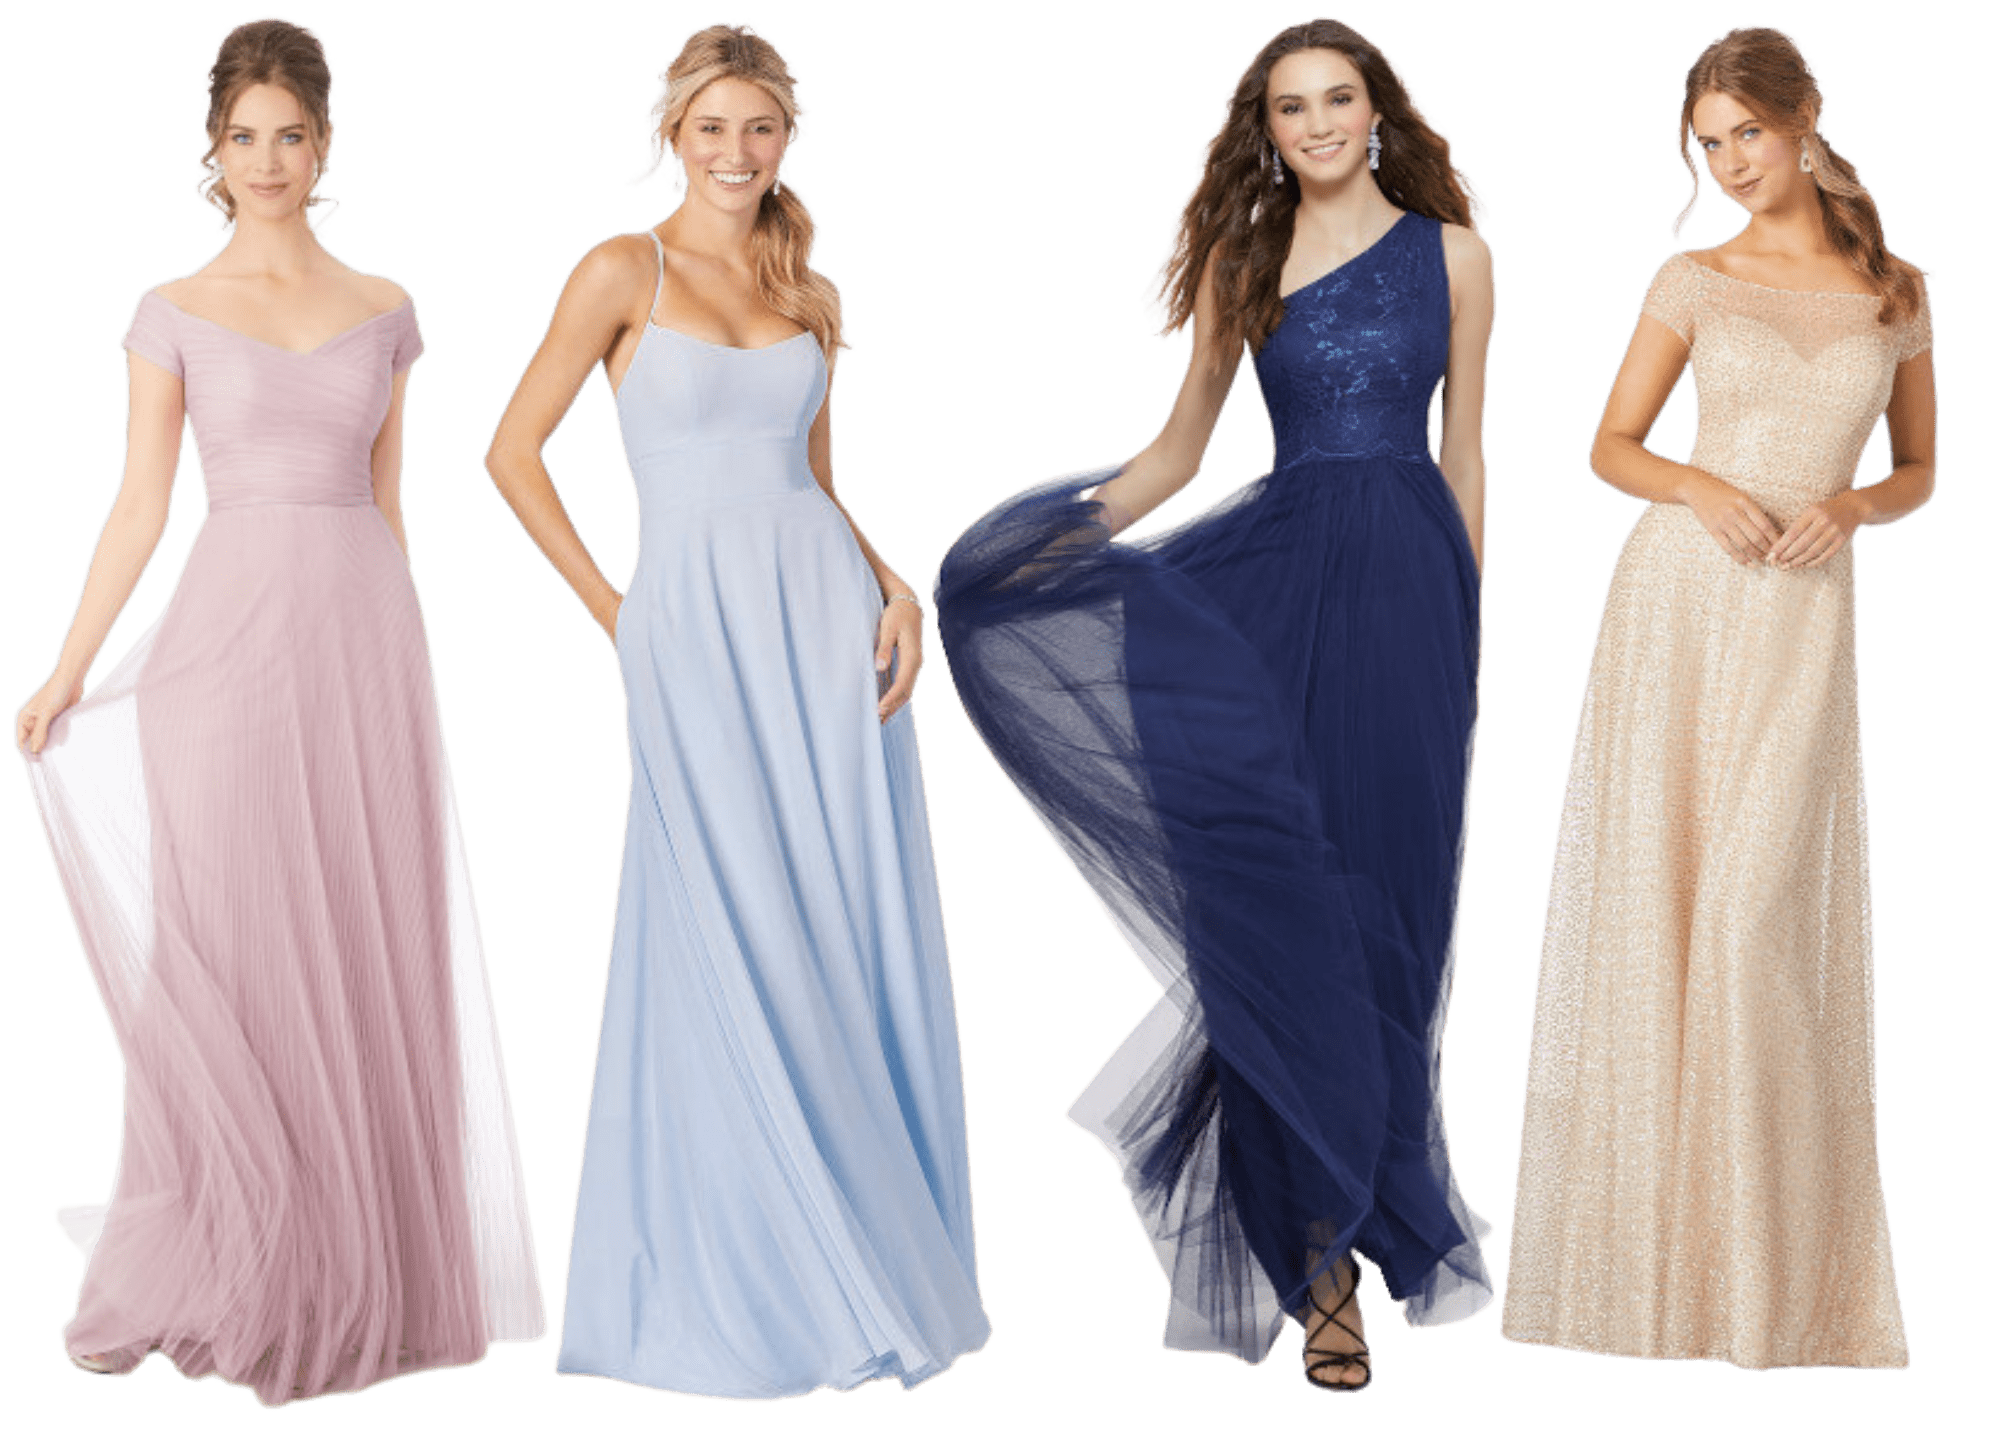 Angelic Inspirations canberra Bridesmaids Dresses